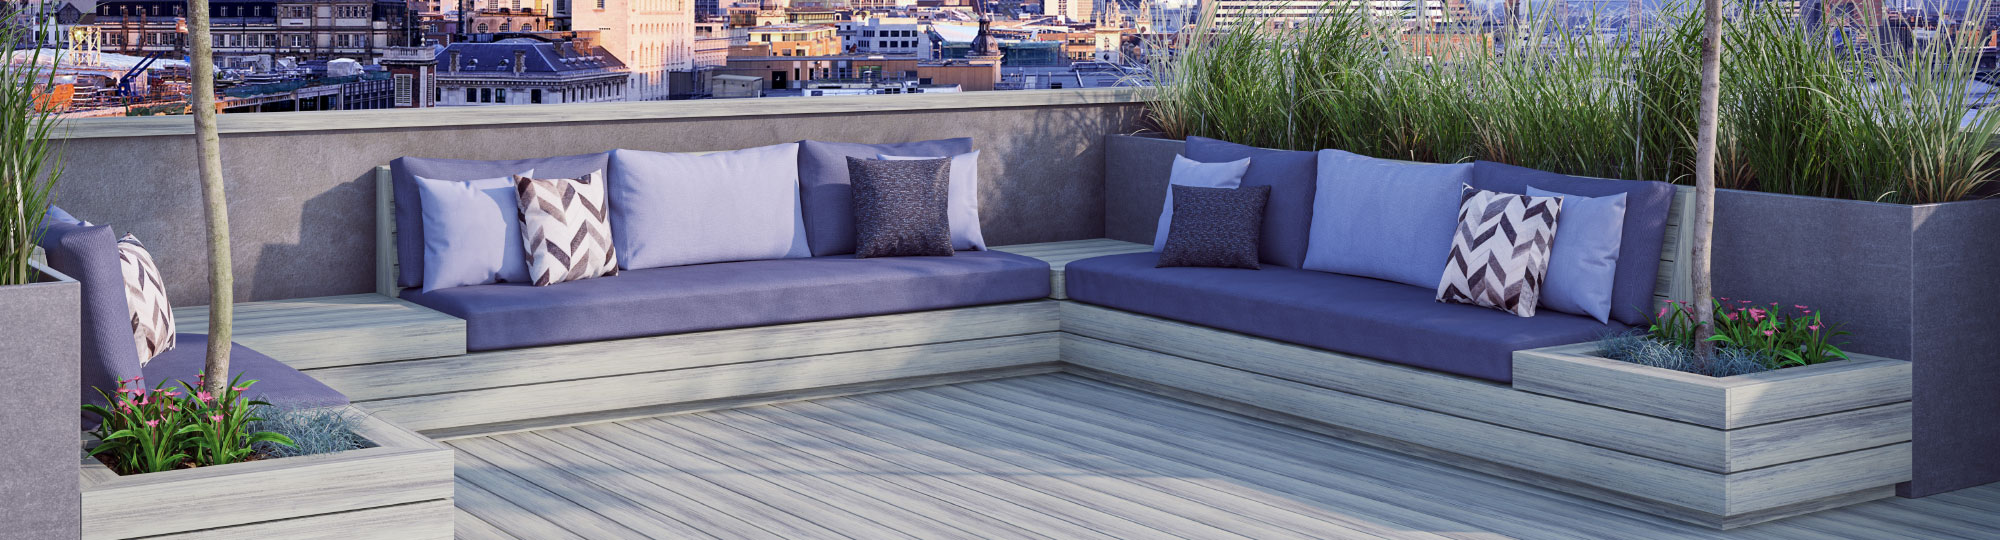 Luxury light grey Voyage decking, with an L shaped sofa.